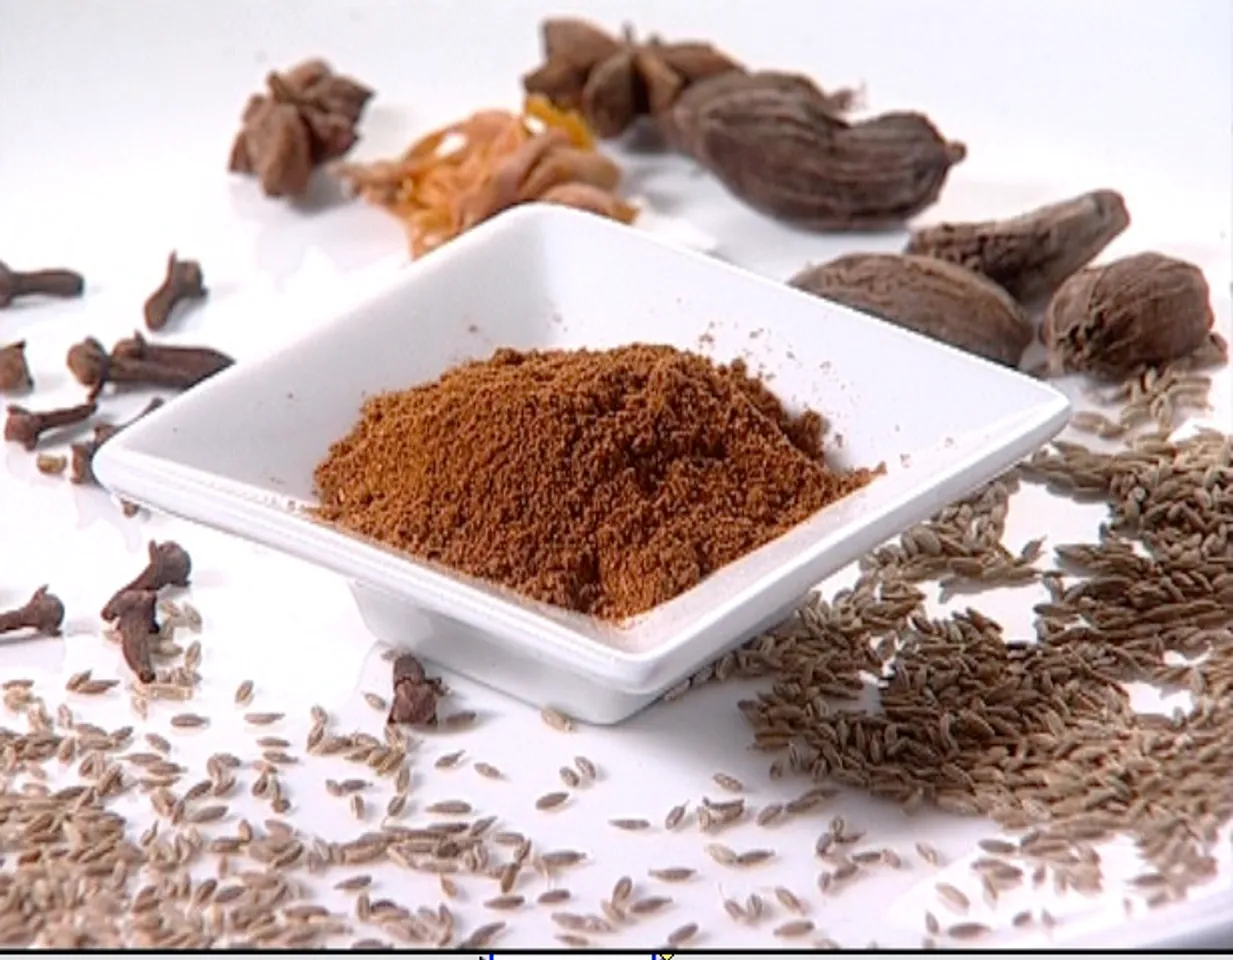 Know more about Indian spice mixes